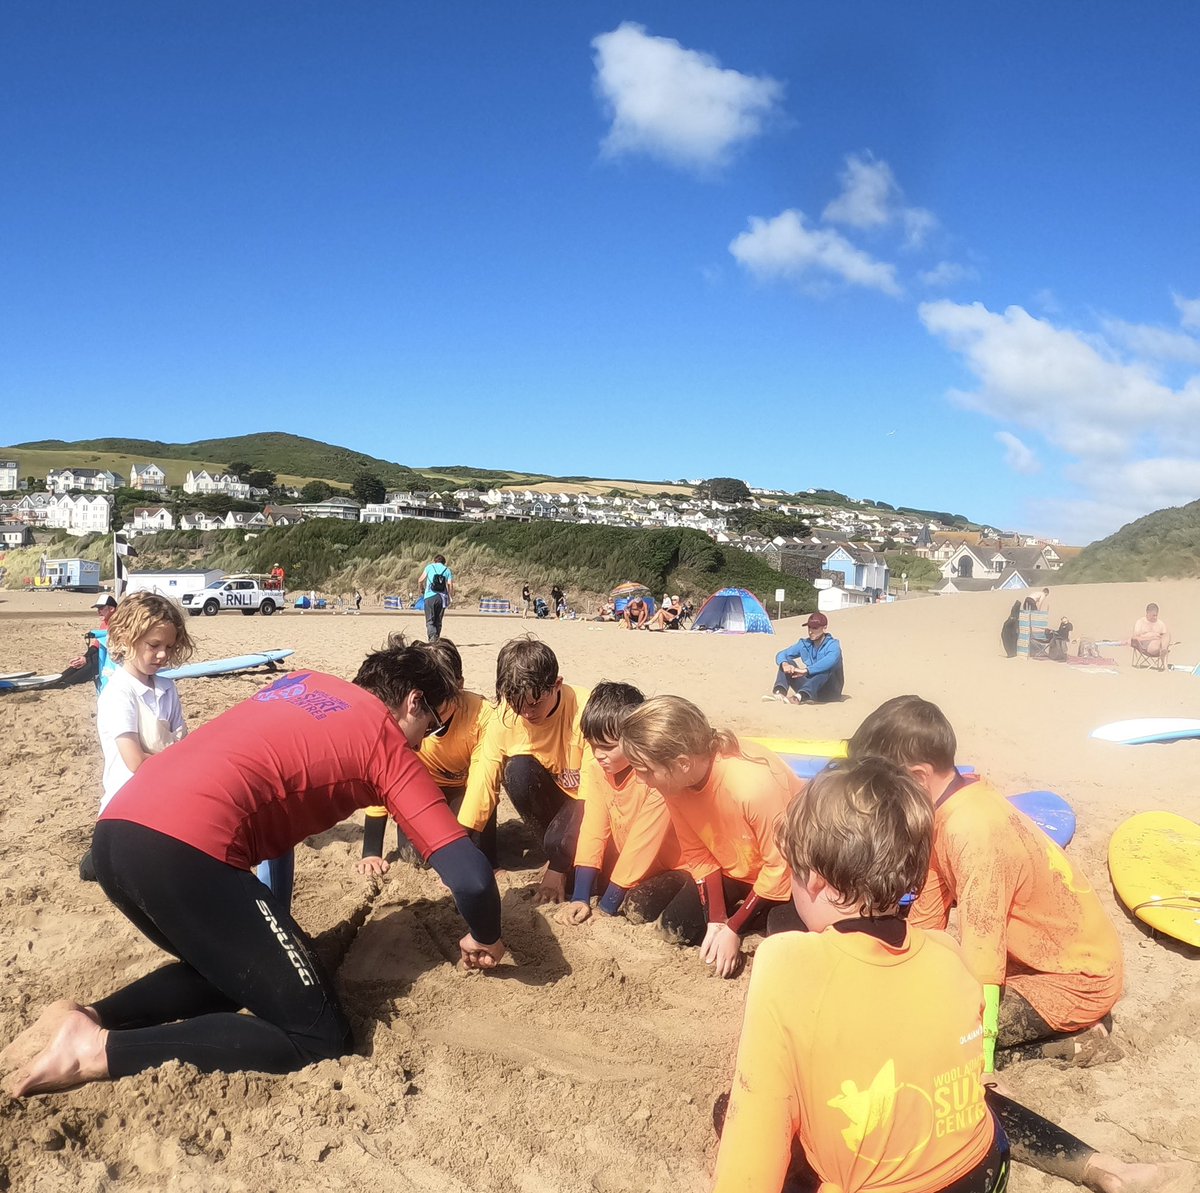 Grom squad beach theory talk in full flow 🌊#greenwaves #unbrokenwaves #popup #surf #learn #gromsquad #woolacombe #woolacombebay #kidswhosurf #surfschool #nextgeneration #learning #frothers #fun #sun #surfers #sea #ocean #northdevon